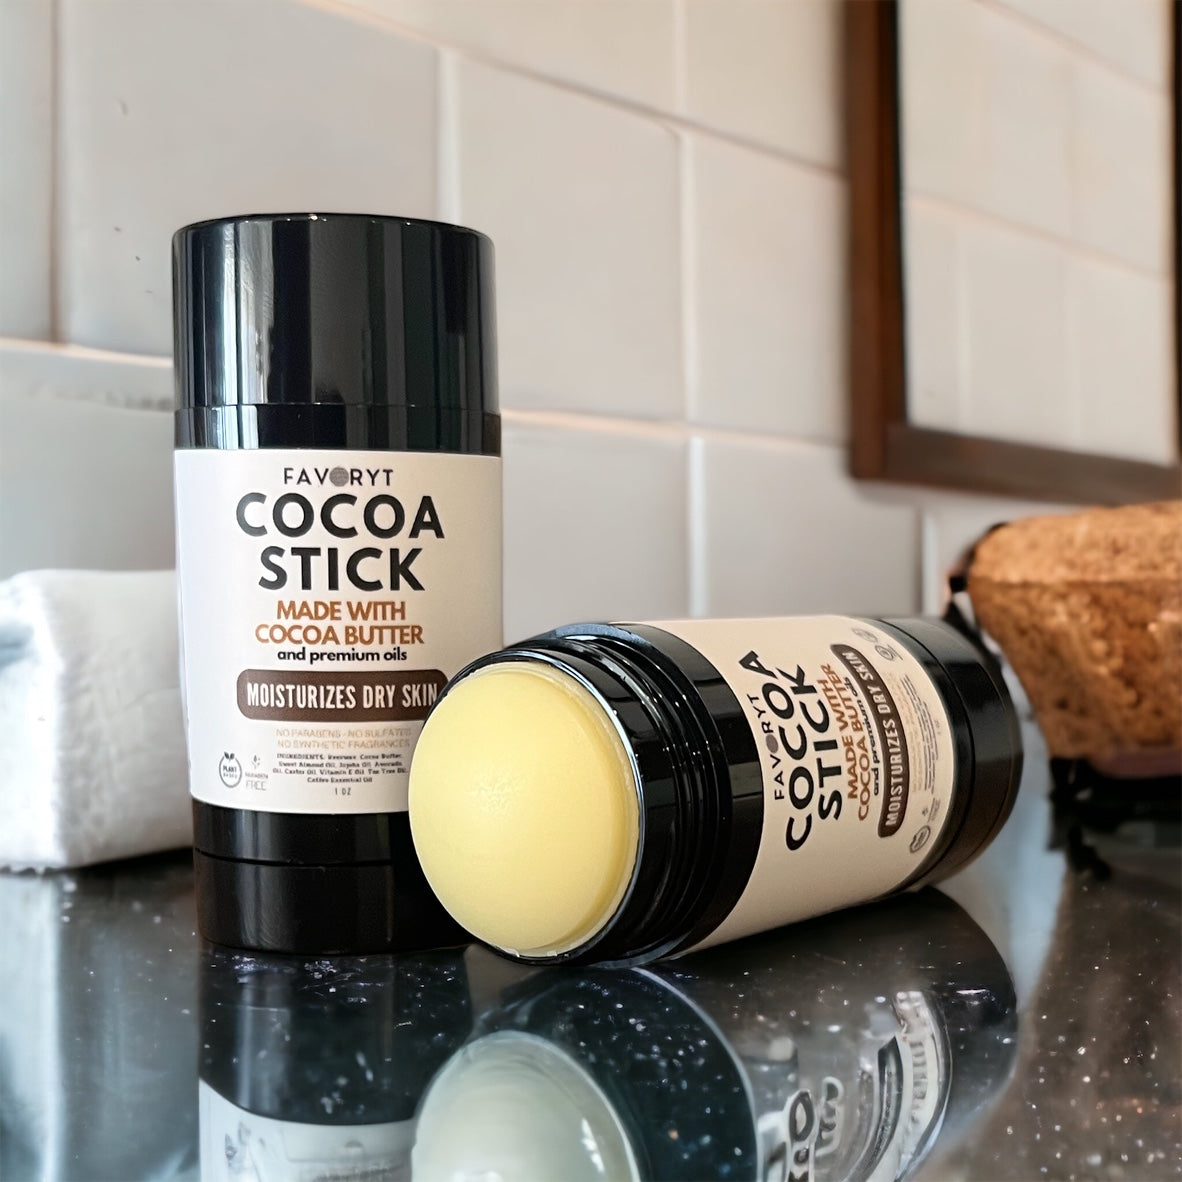 Cocoa Stick - FAVORYT BRAND